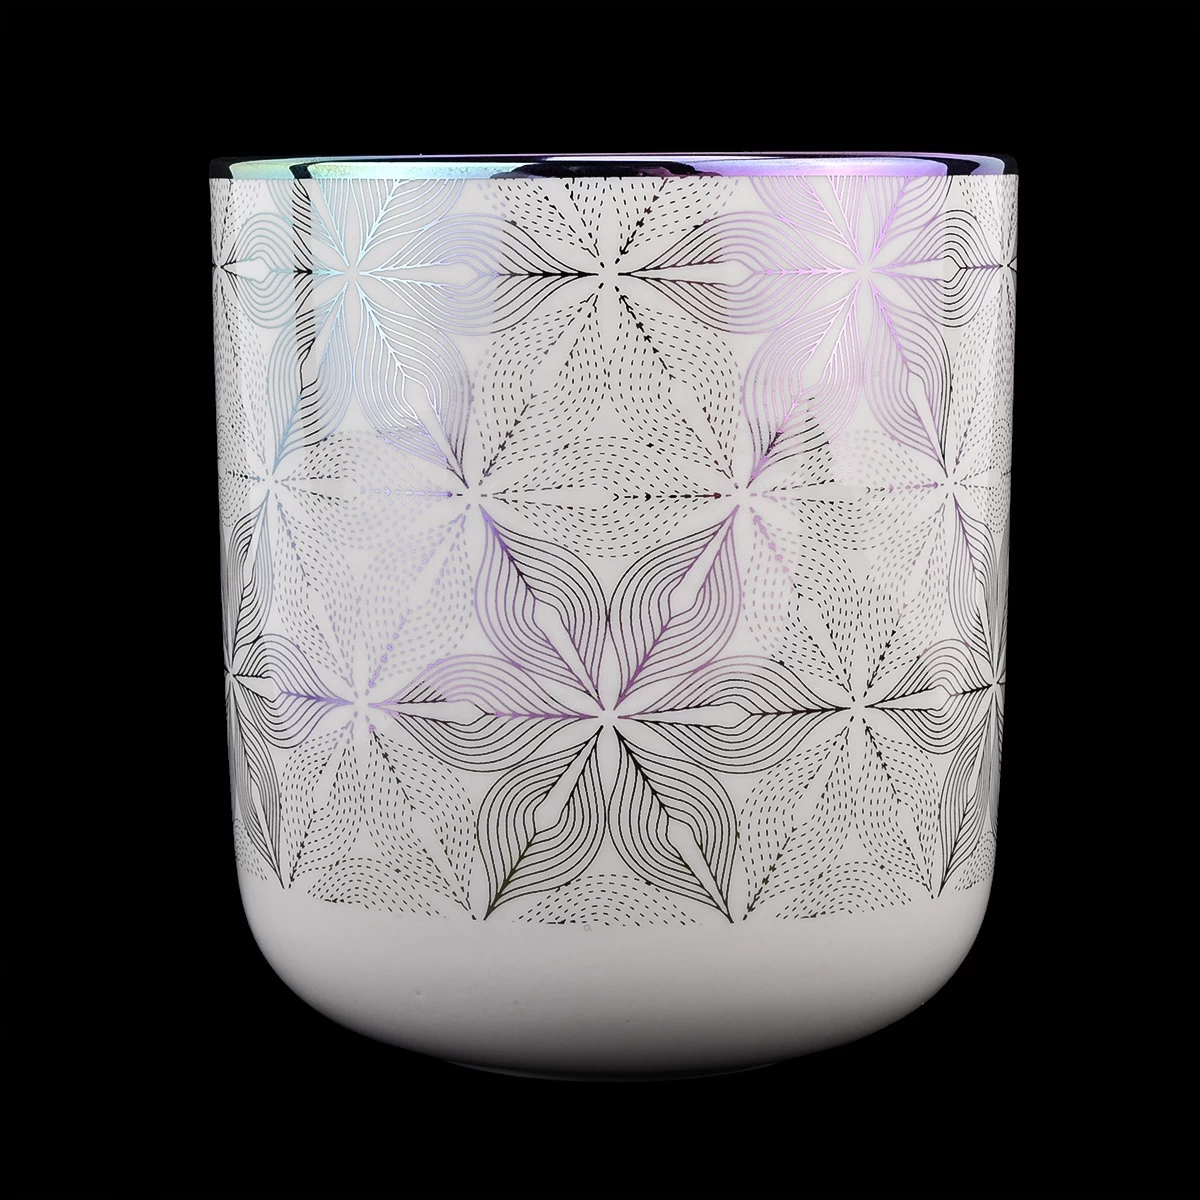 fancy decorative luxury ceramic jar candle container colorful candle jar